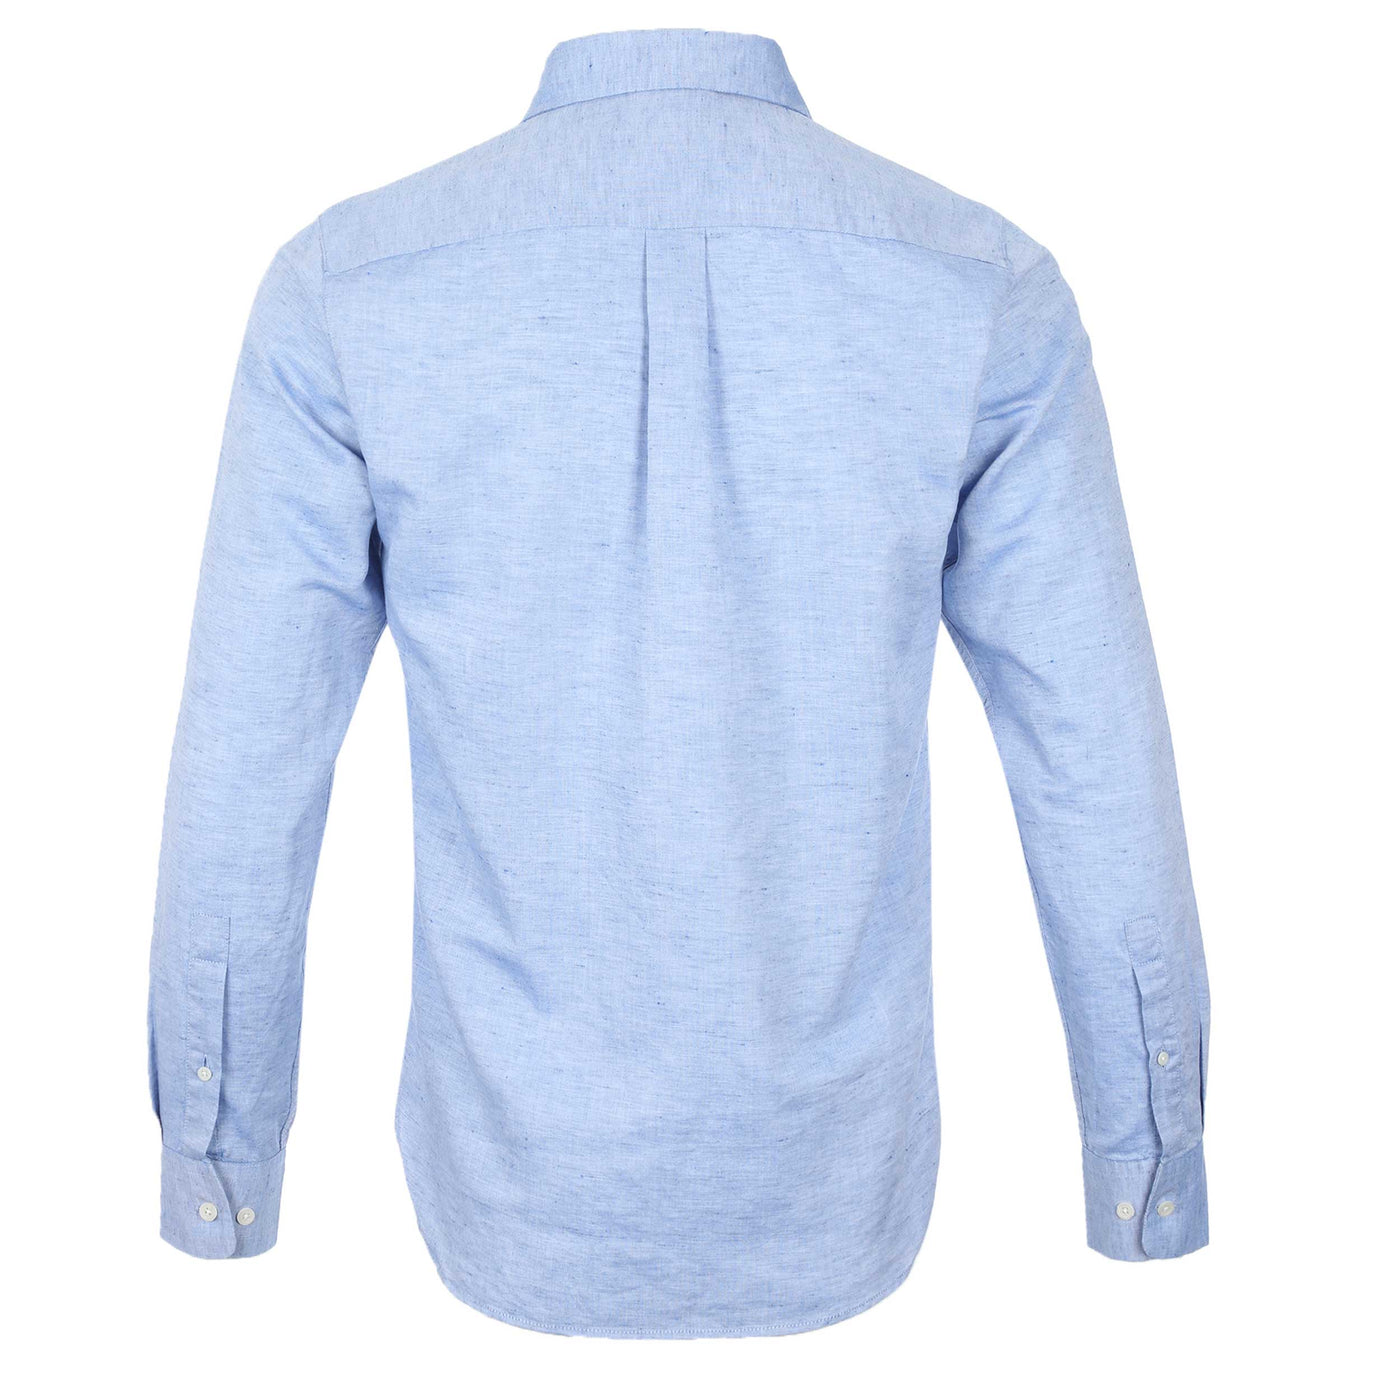 Oliver Sweeney Hawkesworth Shirt in Sky Blue Back